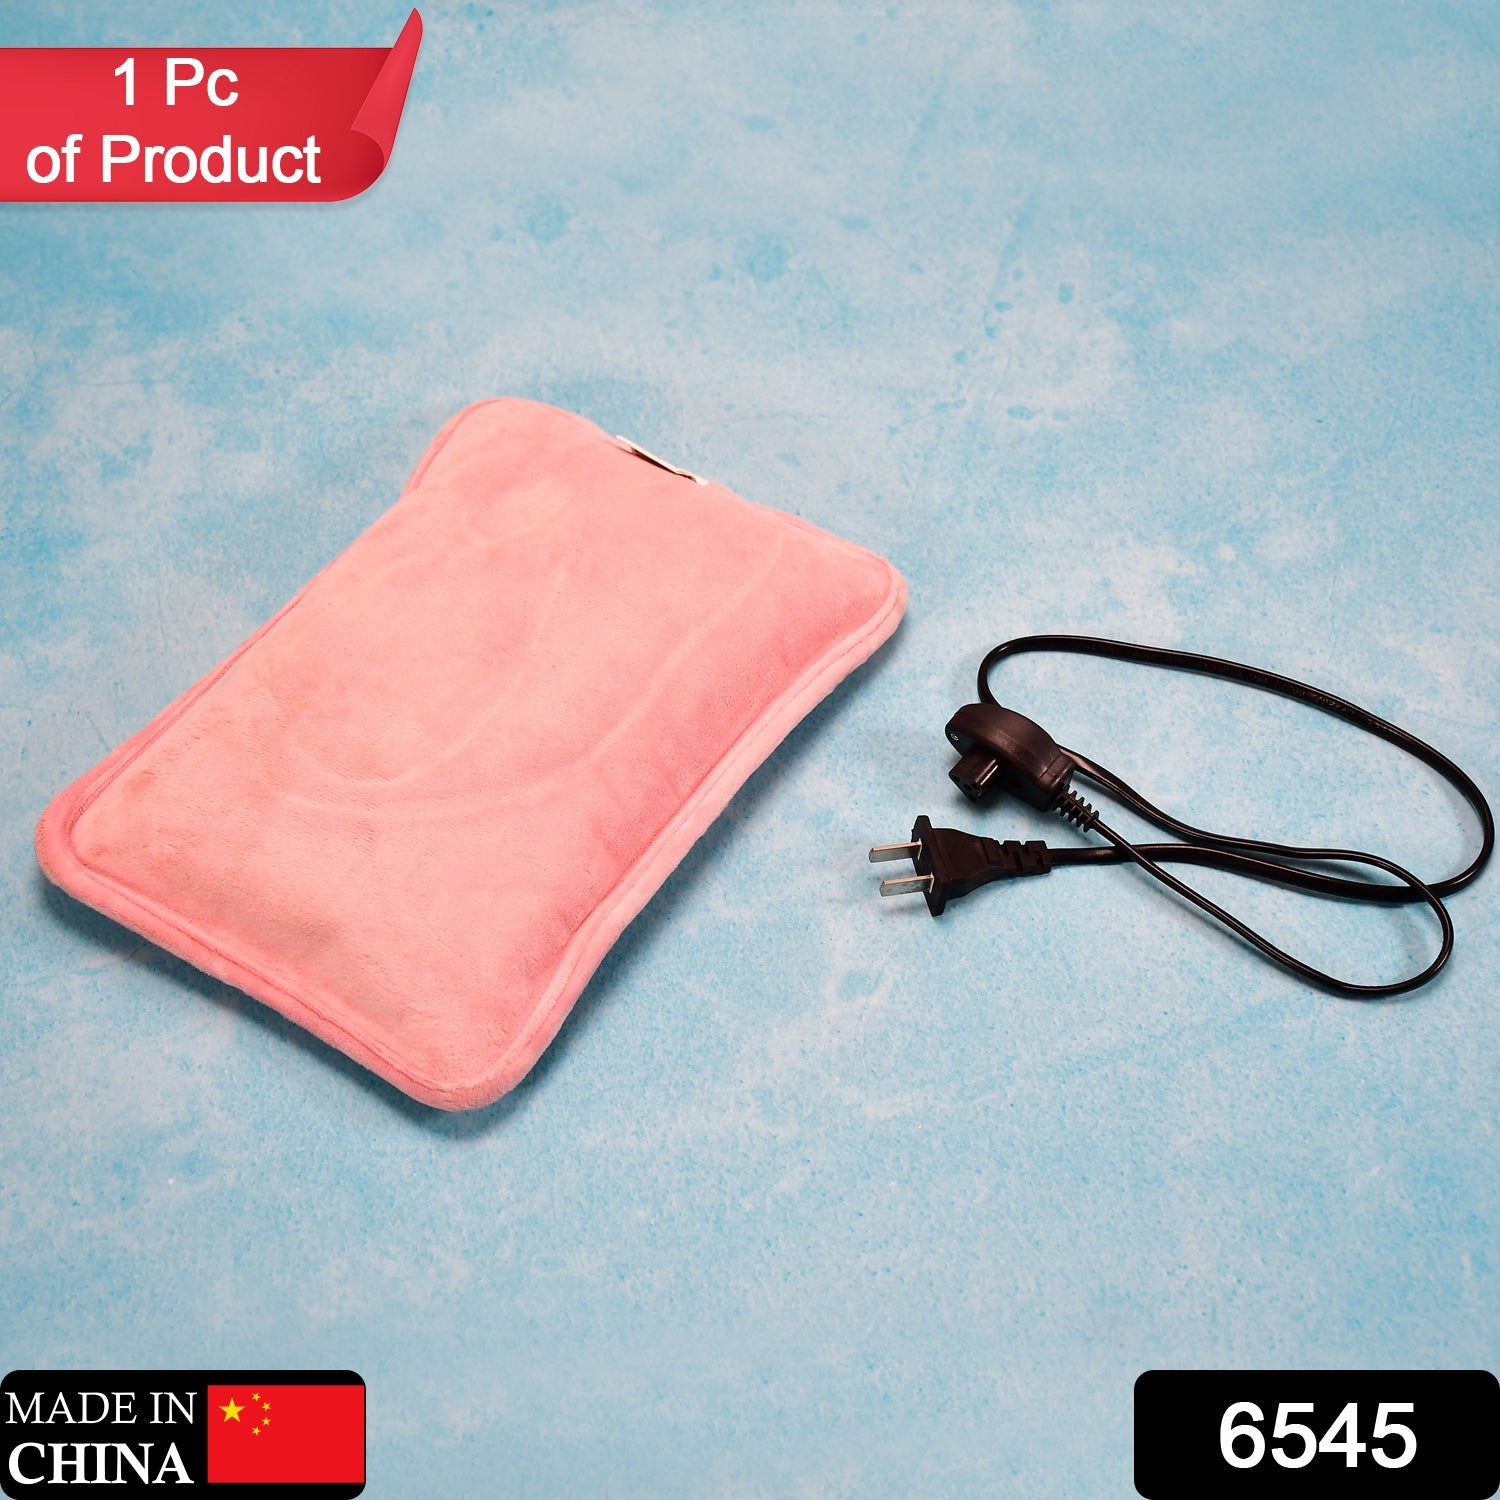 Heating Bag, Hot Water Bags For Pain Relief, Heating Bag Electric, Heating  Pad